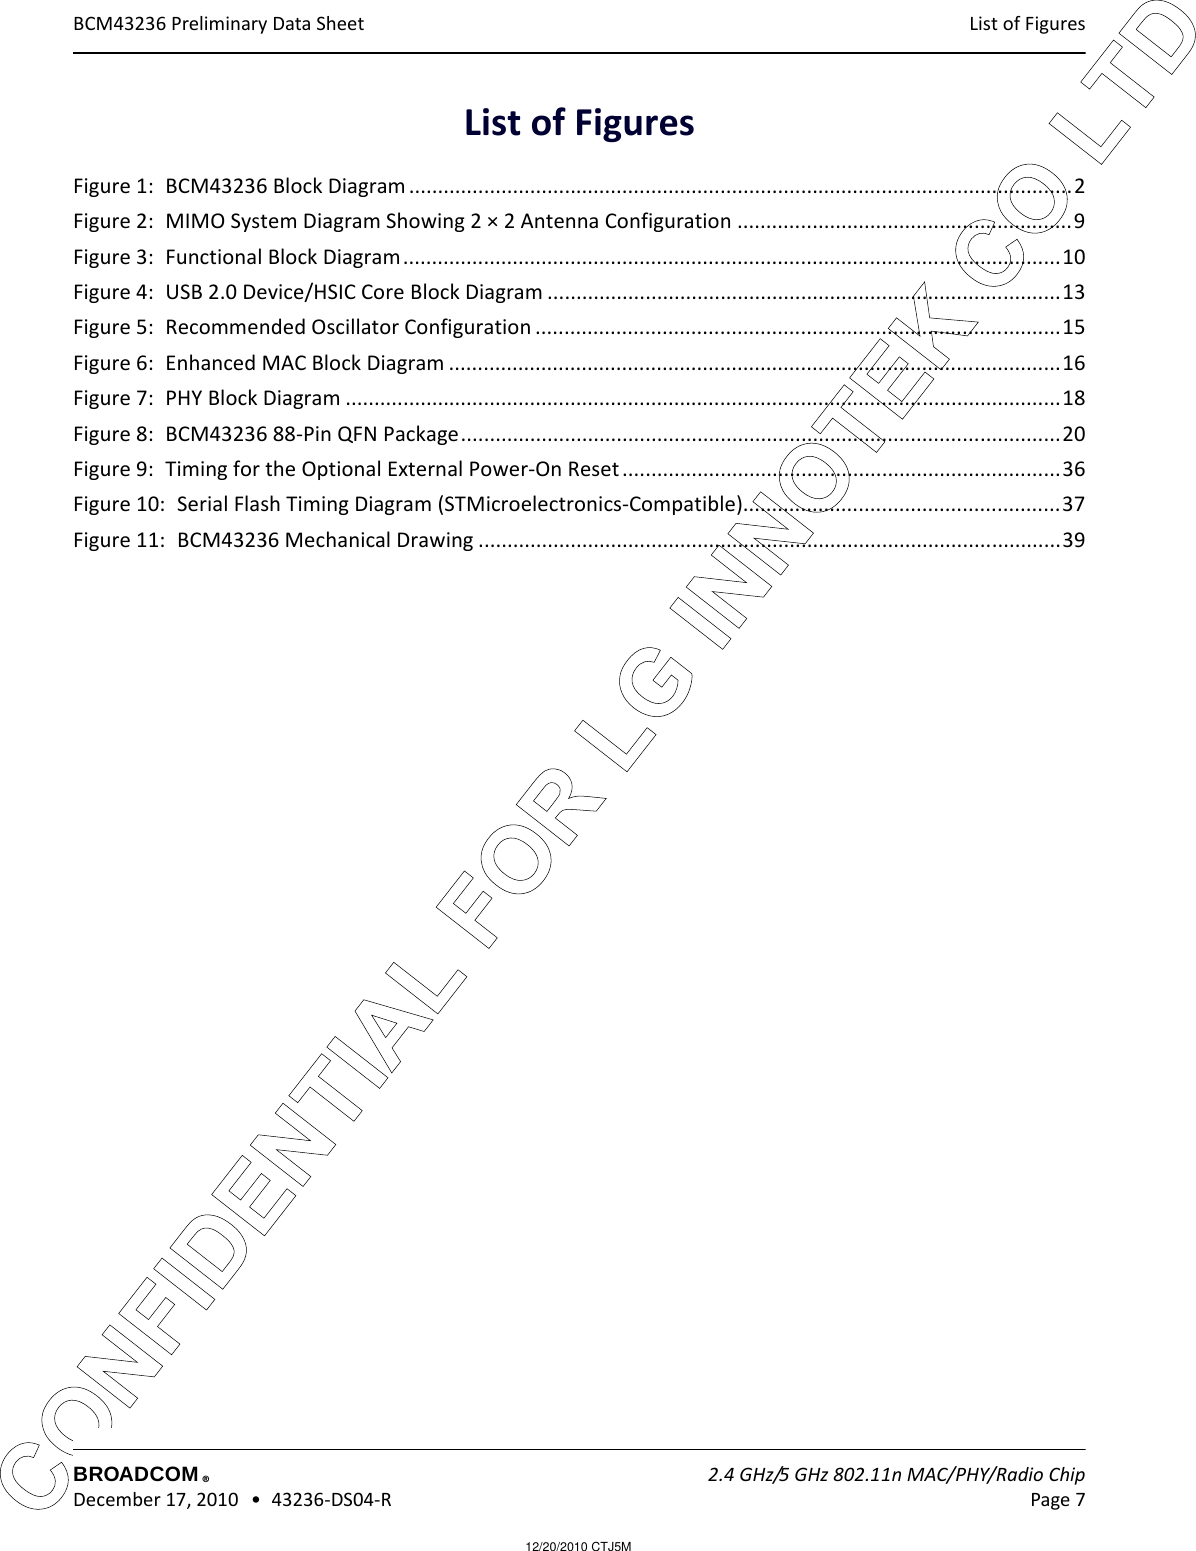 12/20/2010 CTJ5MCONFIDENTIAL FOR LG INNOTEK CO LTD List of Figures BCM43236 Preliminary Data SheetBROADCOM    2.4 GHz/5 GHz 802.11n MAC/PHY/Radio Chip December 17, 2010   •  43236-DS04-R Page 7®List of FiguresFigure 1:  BCM43236 Block Diagram ...................................................................................................................2Figure 2:  MIMO System Diagram Showing 2 × 2 Antenna Configuration ..........................................................9Figure 3:  Functional Block Diagram..................................................................................................................10Figure 4:  USB 2.0 Device/HSIC Core Block Diagram .........................................................................................13Figure 5:  Recommended Oscillator Configuration ...........................................................................................15Figure 6:  Enhanced MAC Block Diagram ..........................................................................................................16Figure 7:  PHY Block Diagram ............................................................................................................................18Figure 8:  BCM43236 88-Pin QFN Package........................................................................................................20Figure 9:  Timing for the Optional External Power-On Reset............................................................................36Figure 10:  Serial Flash Timing Diagram (STMicroelectronics-Compatible).......................................................37Figure 11:  BCM43236 Mechanical Drawing .....................................................................................................39